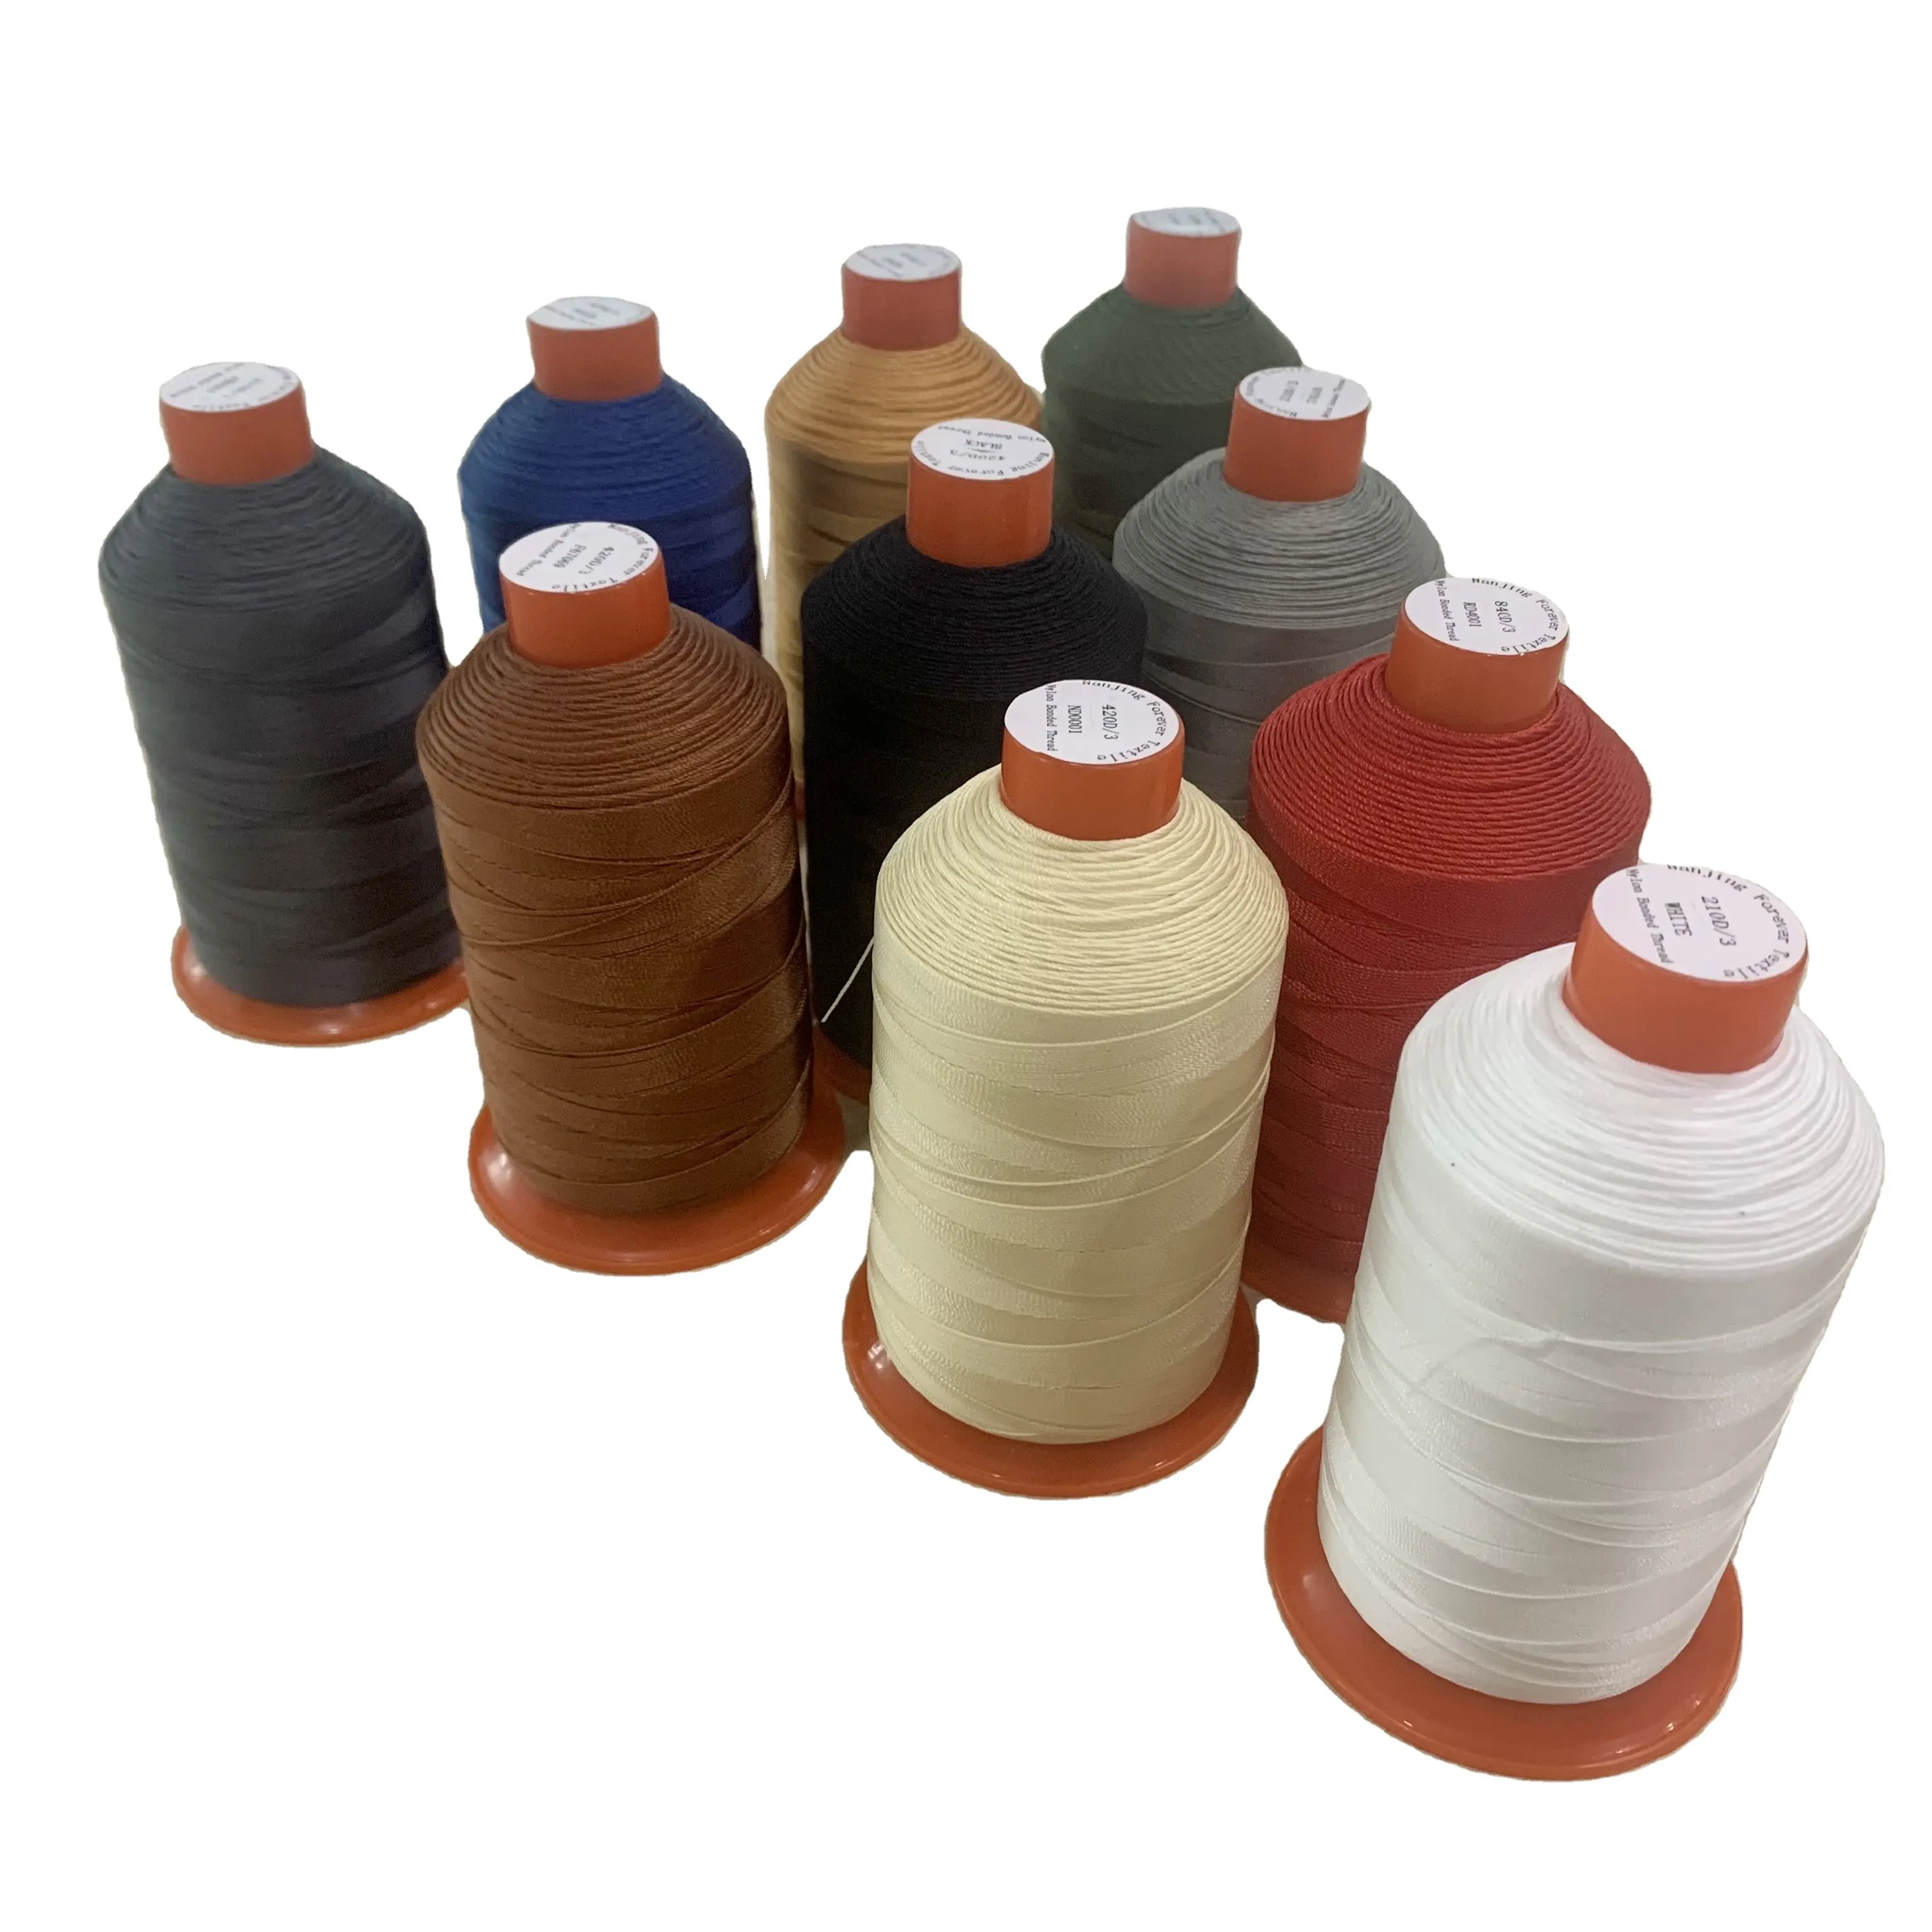 China Supplier Nylon 210d Best Quality Bonded Thread For Leather Sewing Thread Manufacturer